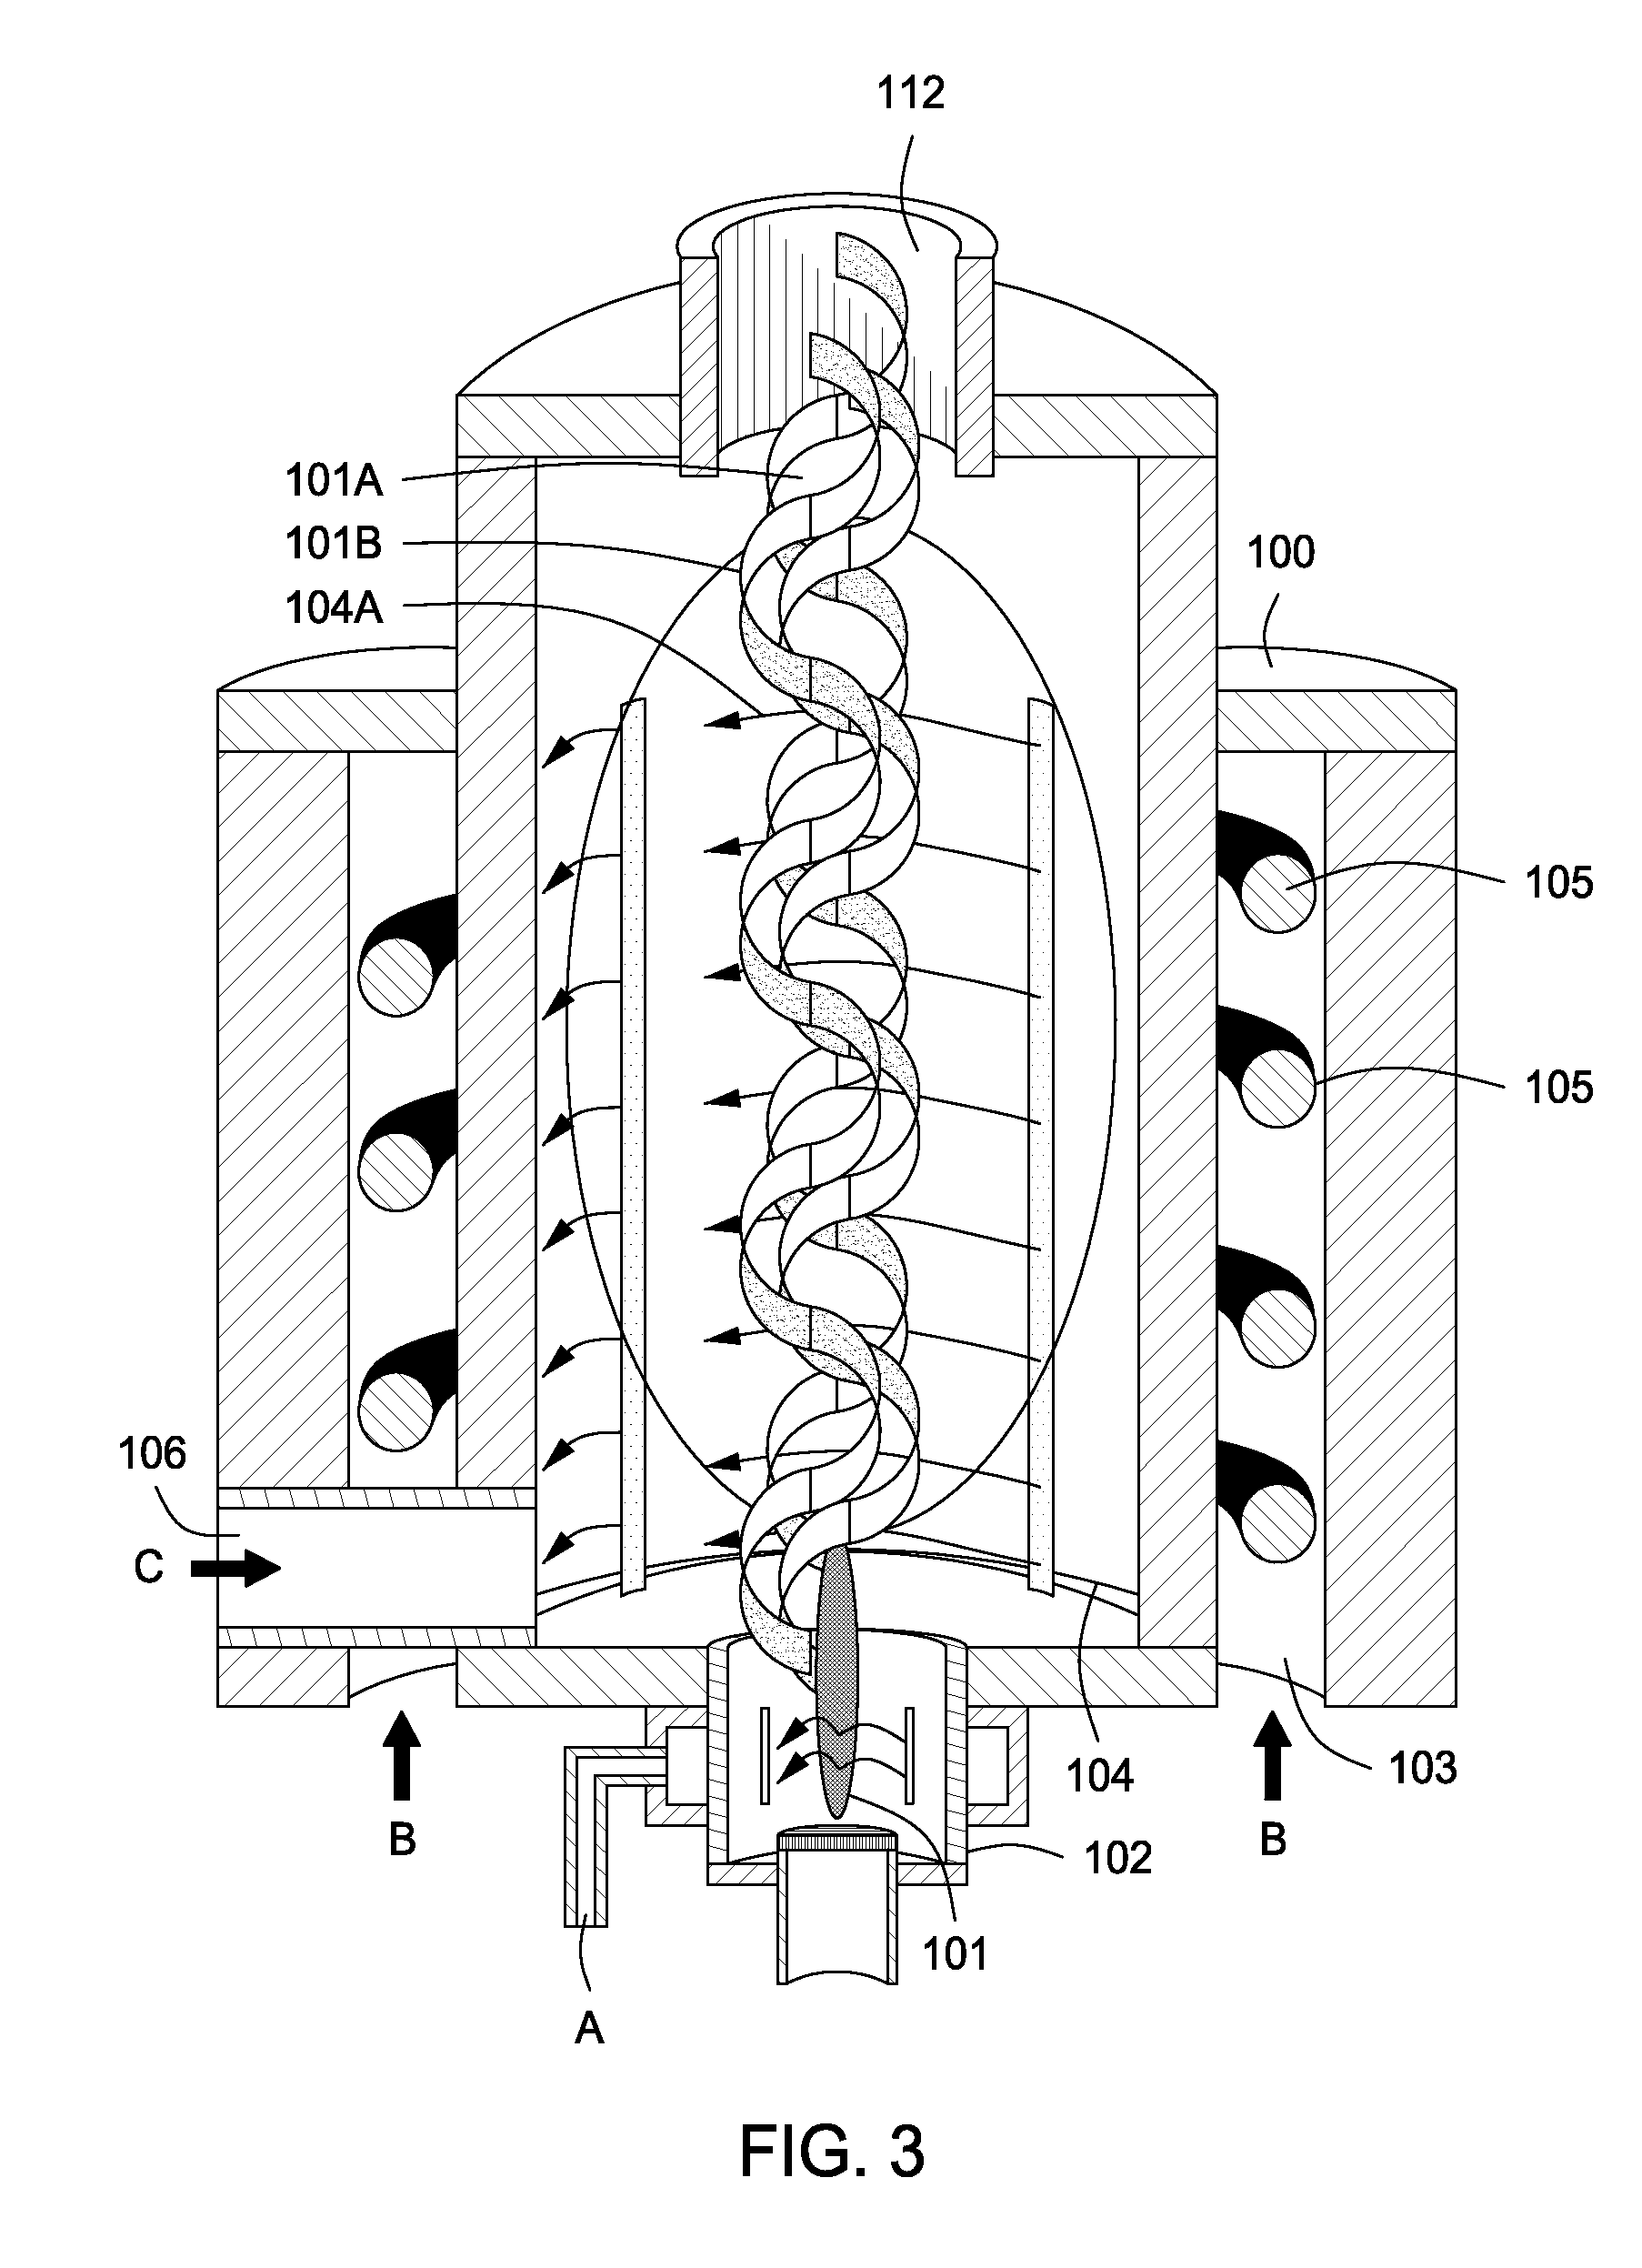 Plasma whirl reactor apparatus and methods of use